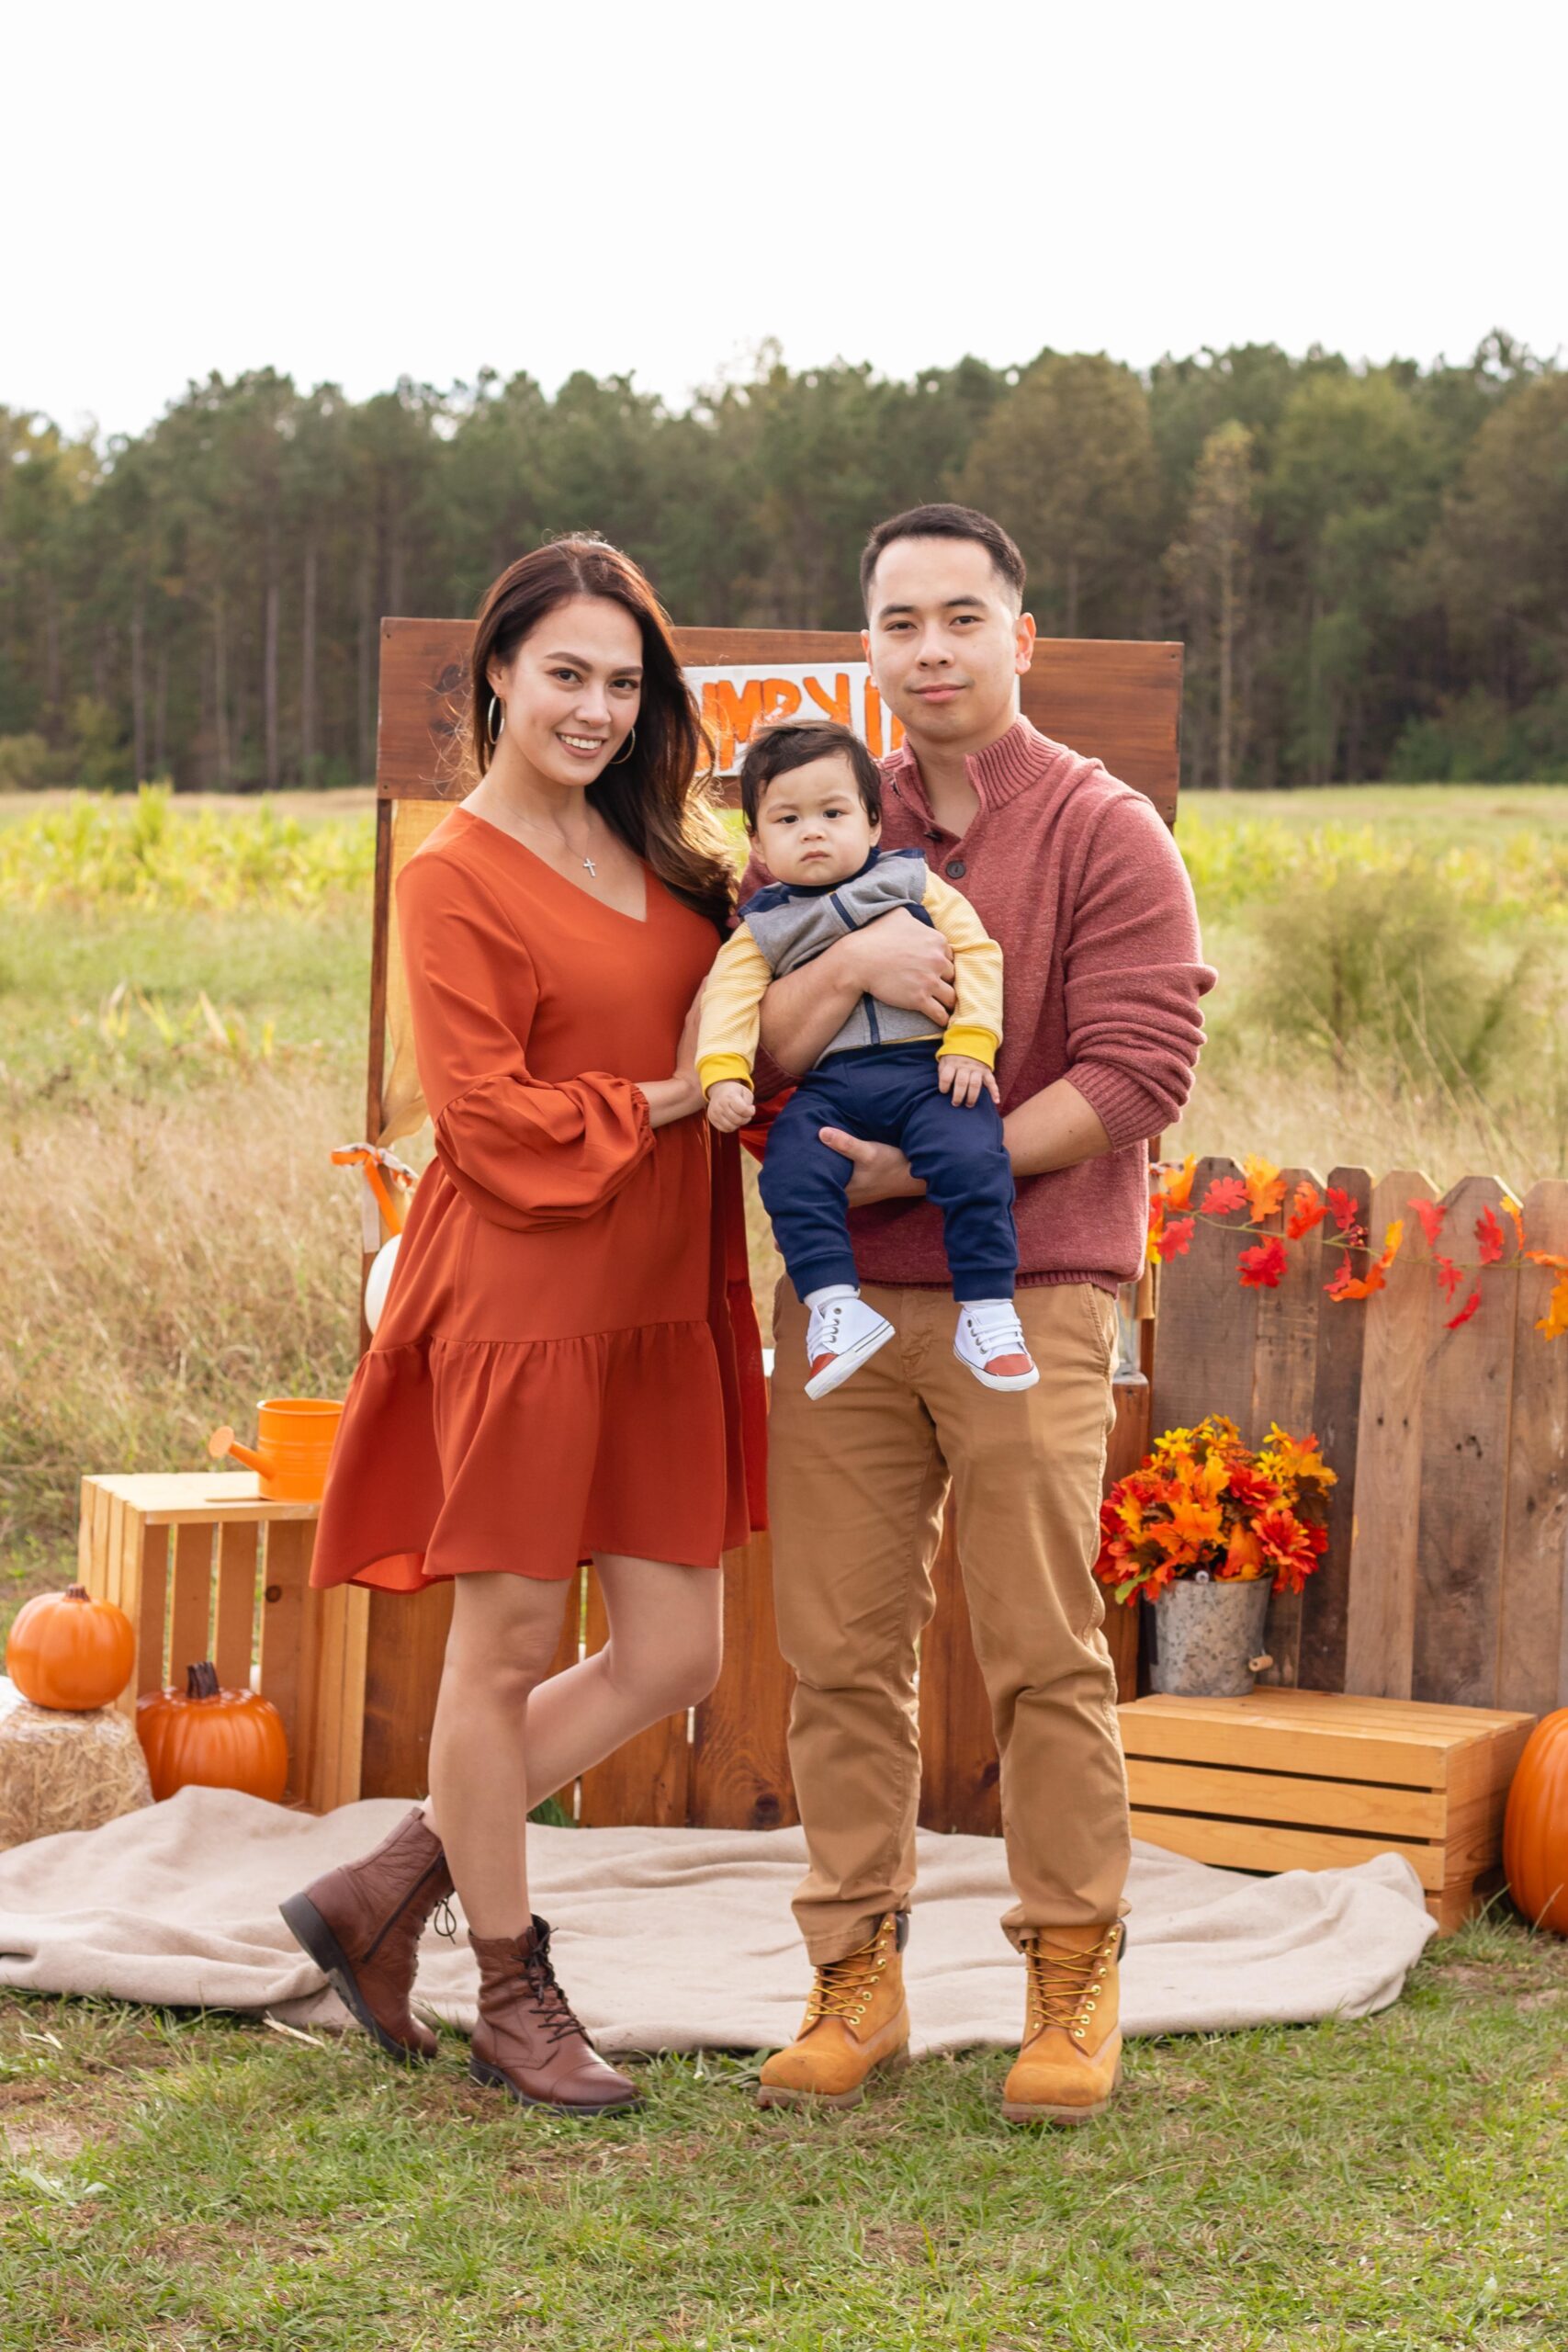 Smiling mom and dad, holding toddler son in pumpkin patch